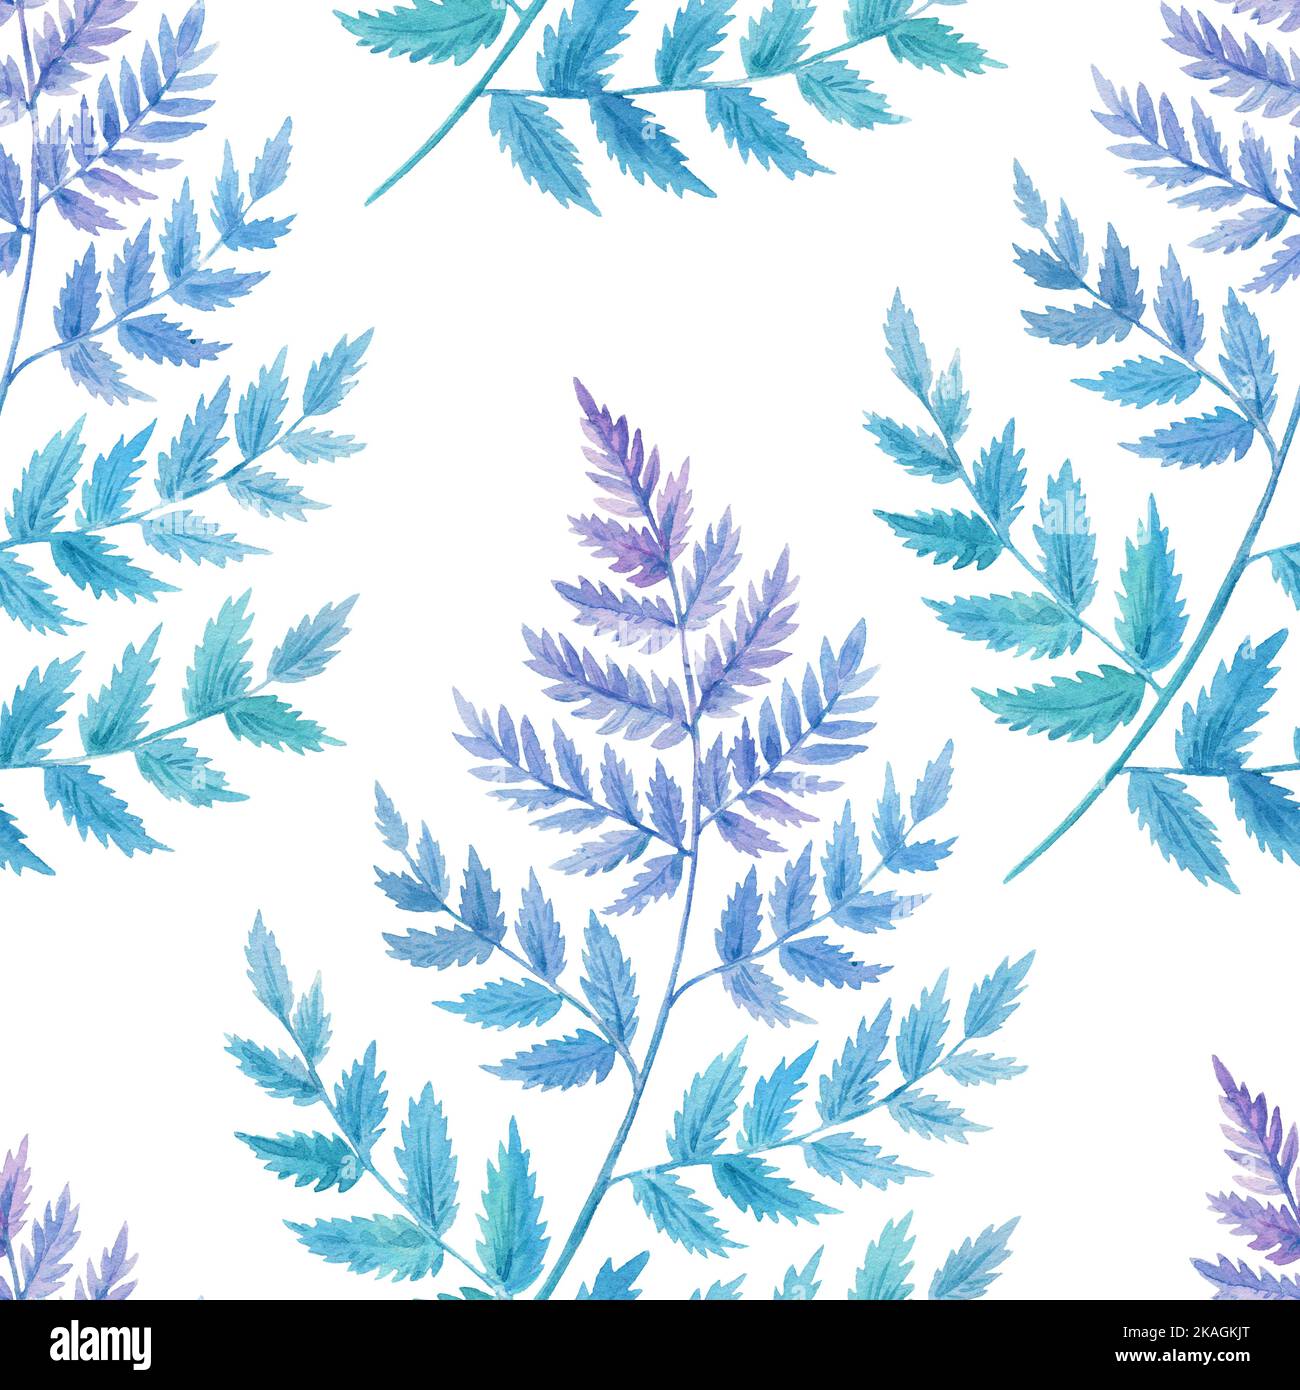 Hand drawn seamless pattern with fern leaves. Detailed watercolor botanical illustration. Stock Photo